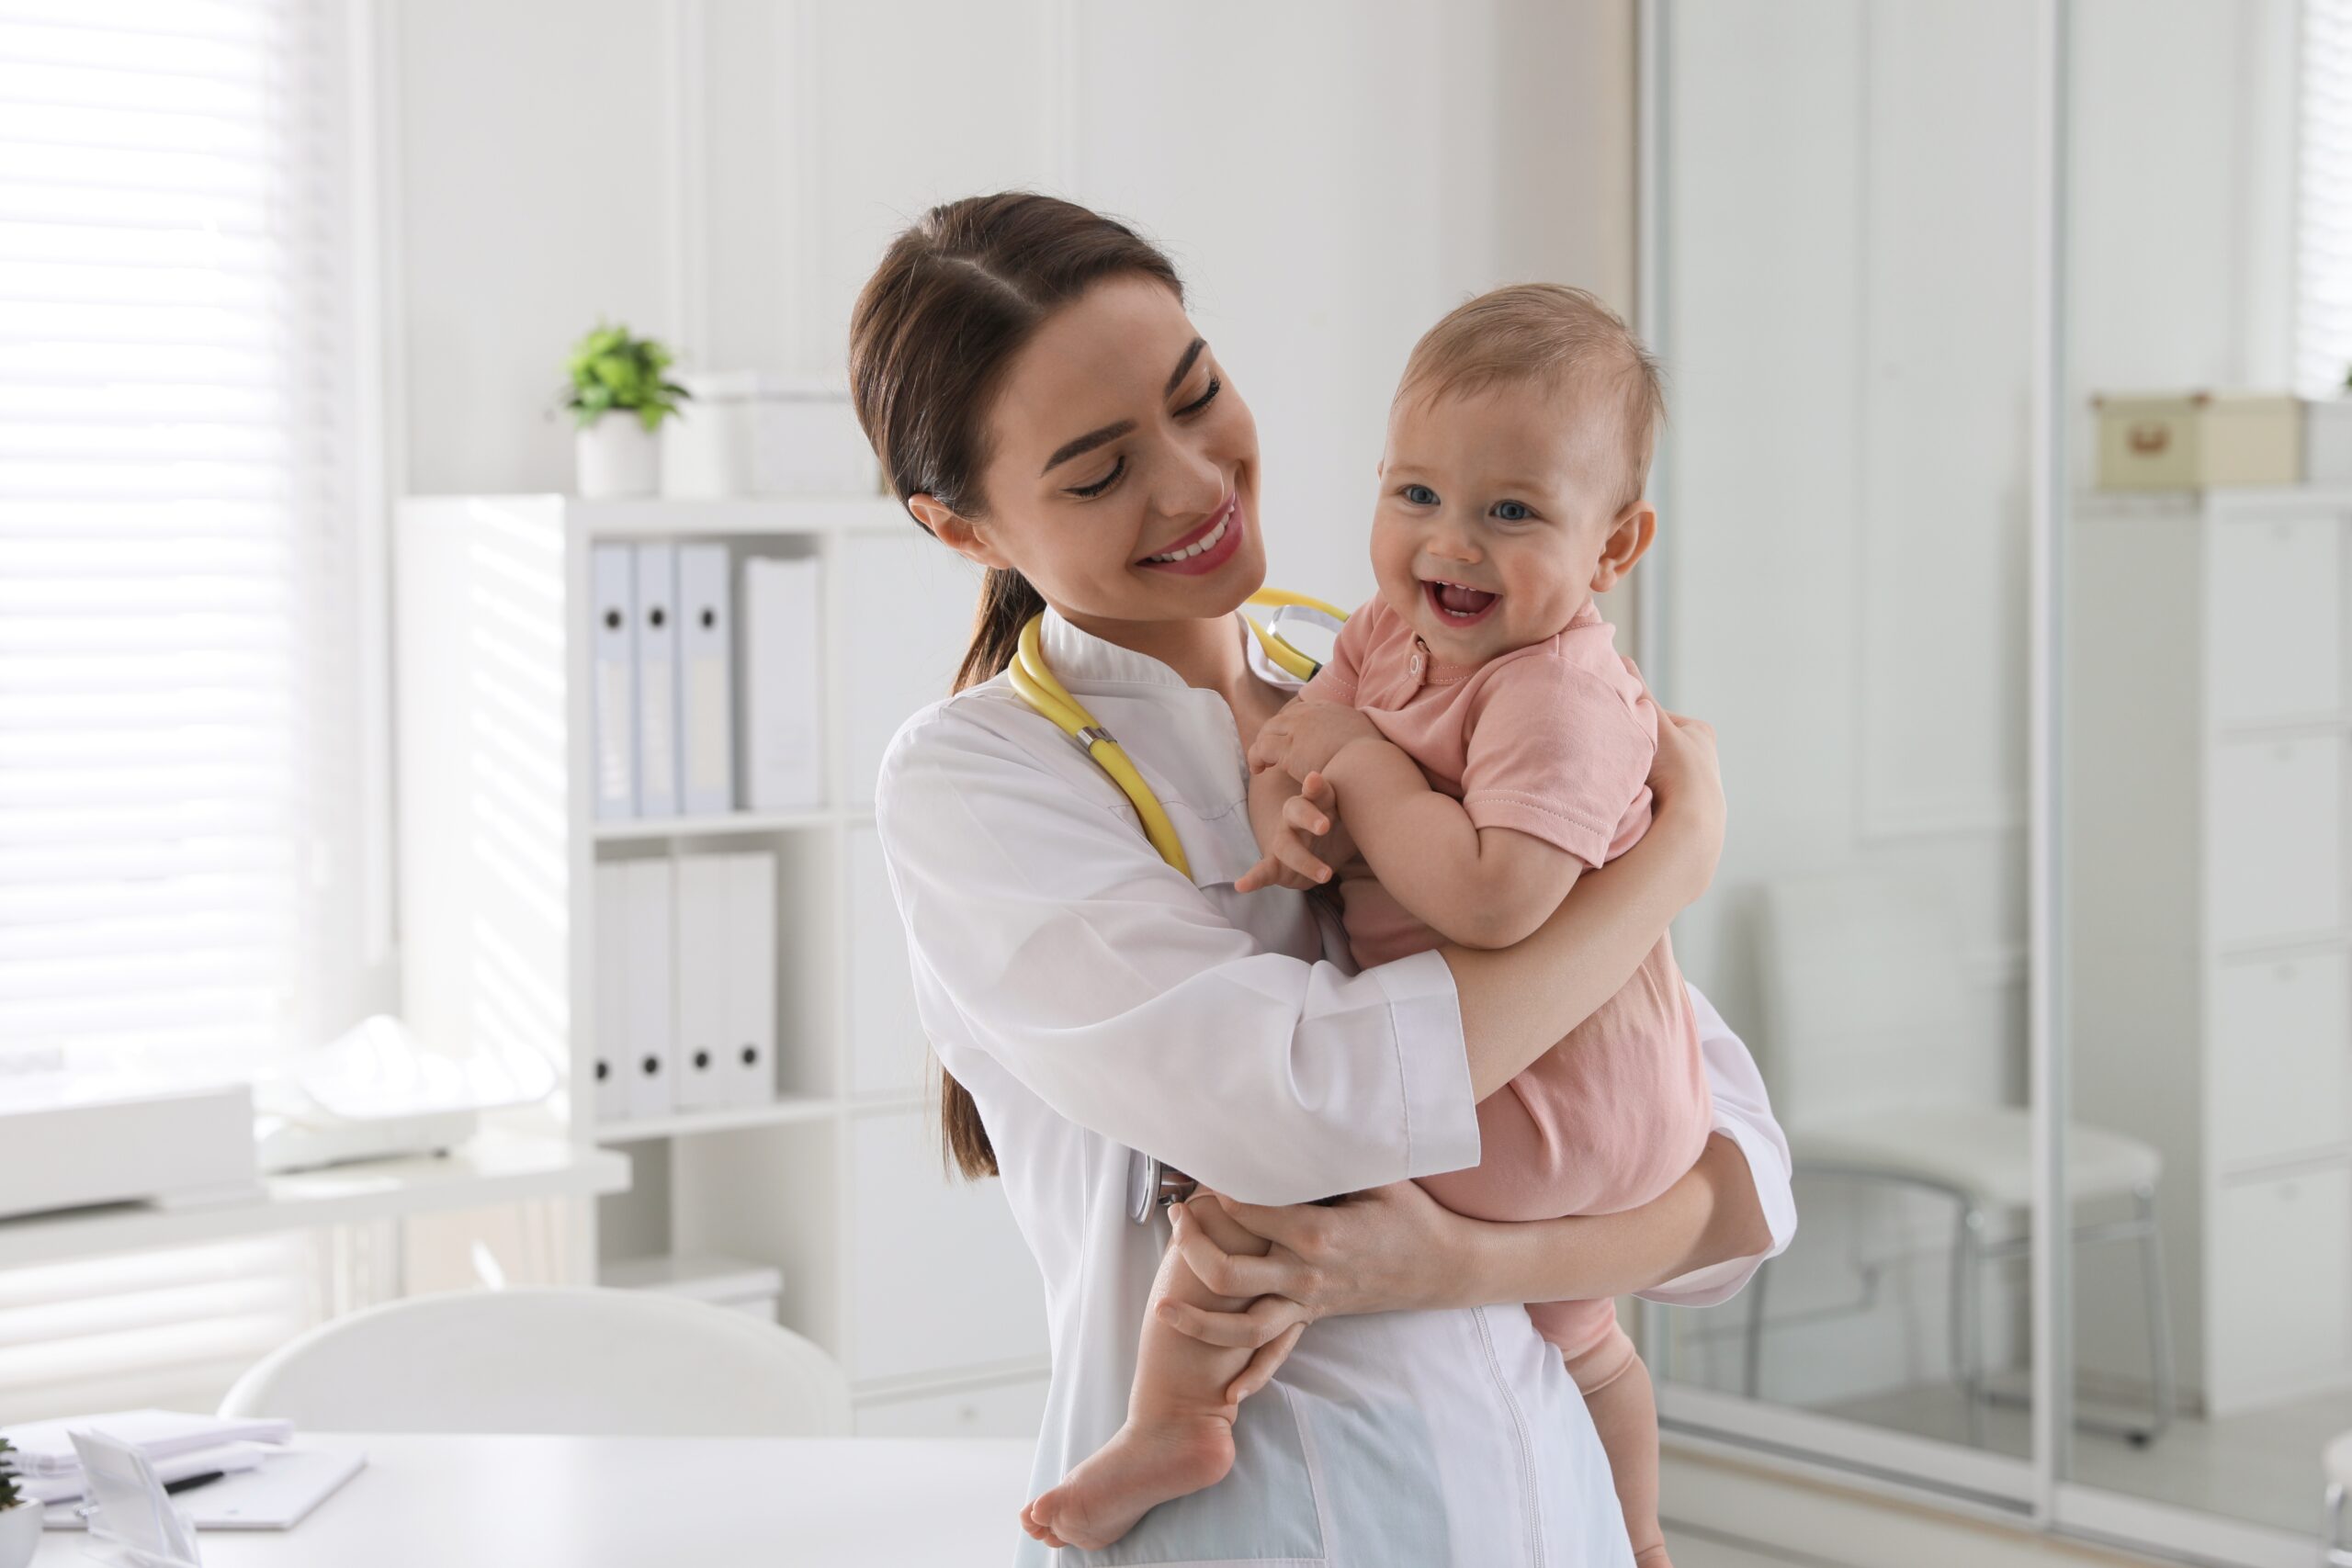 Pediatrician holding a baby